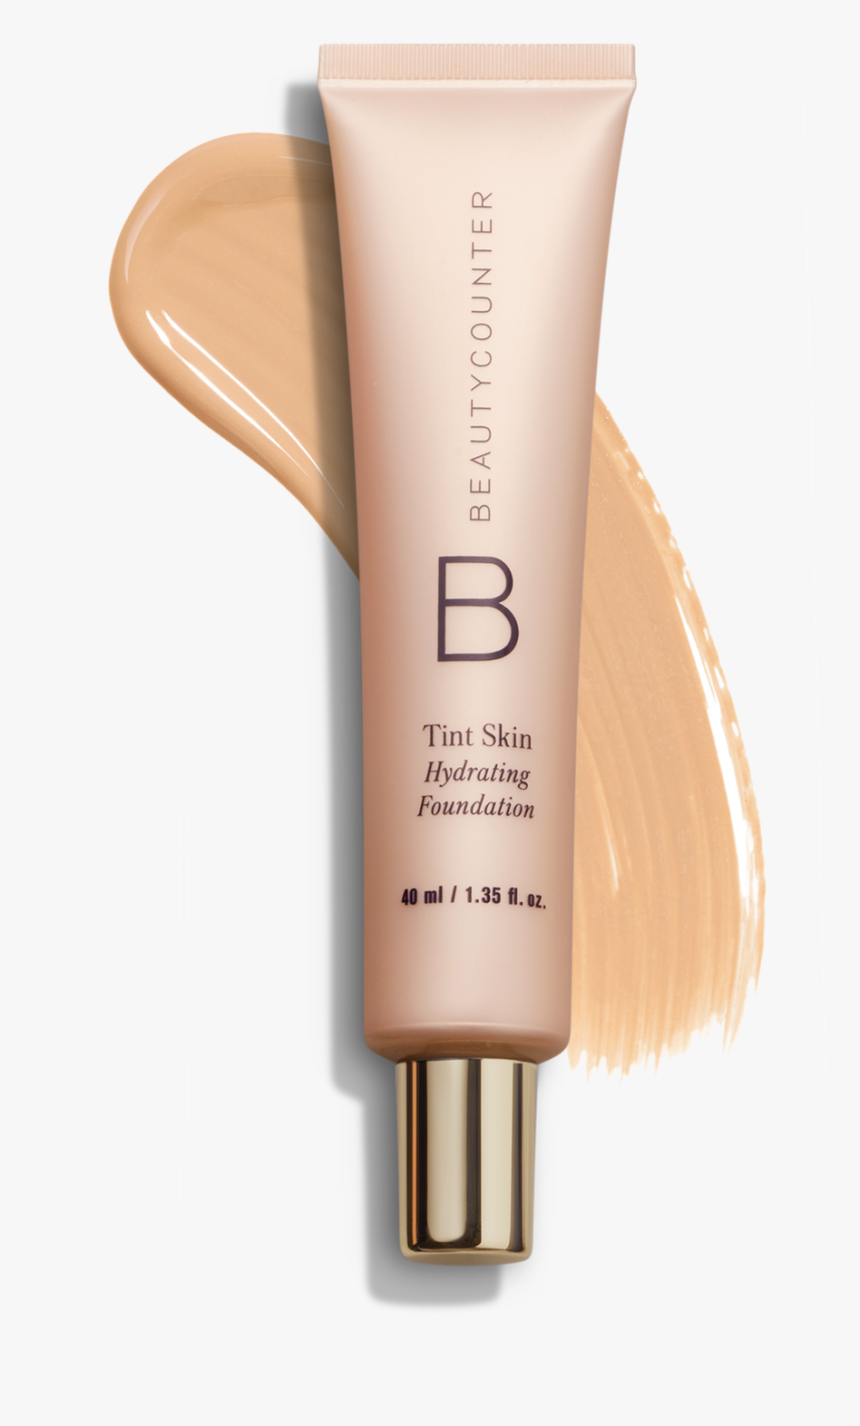 Product Images 2311 Imgs Pdp New Tint Skin Hydrating - Sand Beautycounter Tint Skin Foundation, HD Png Download, Free Download